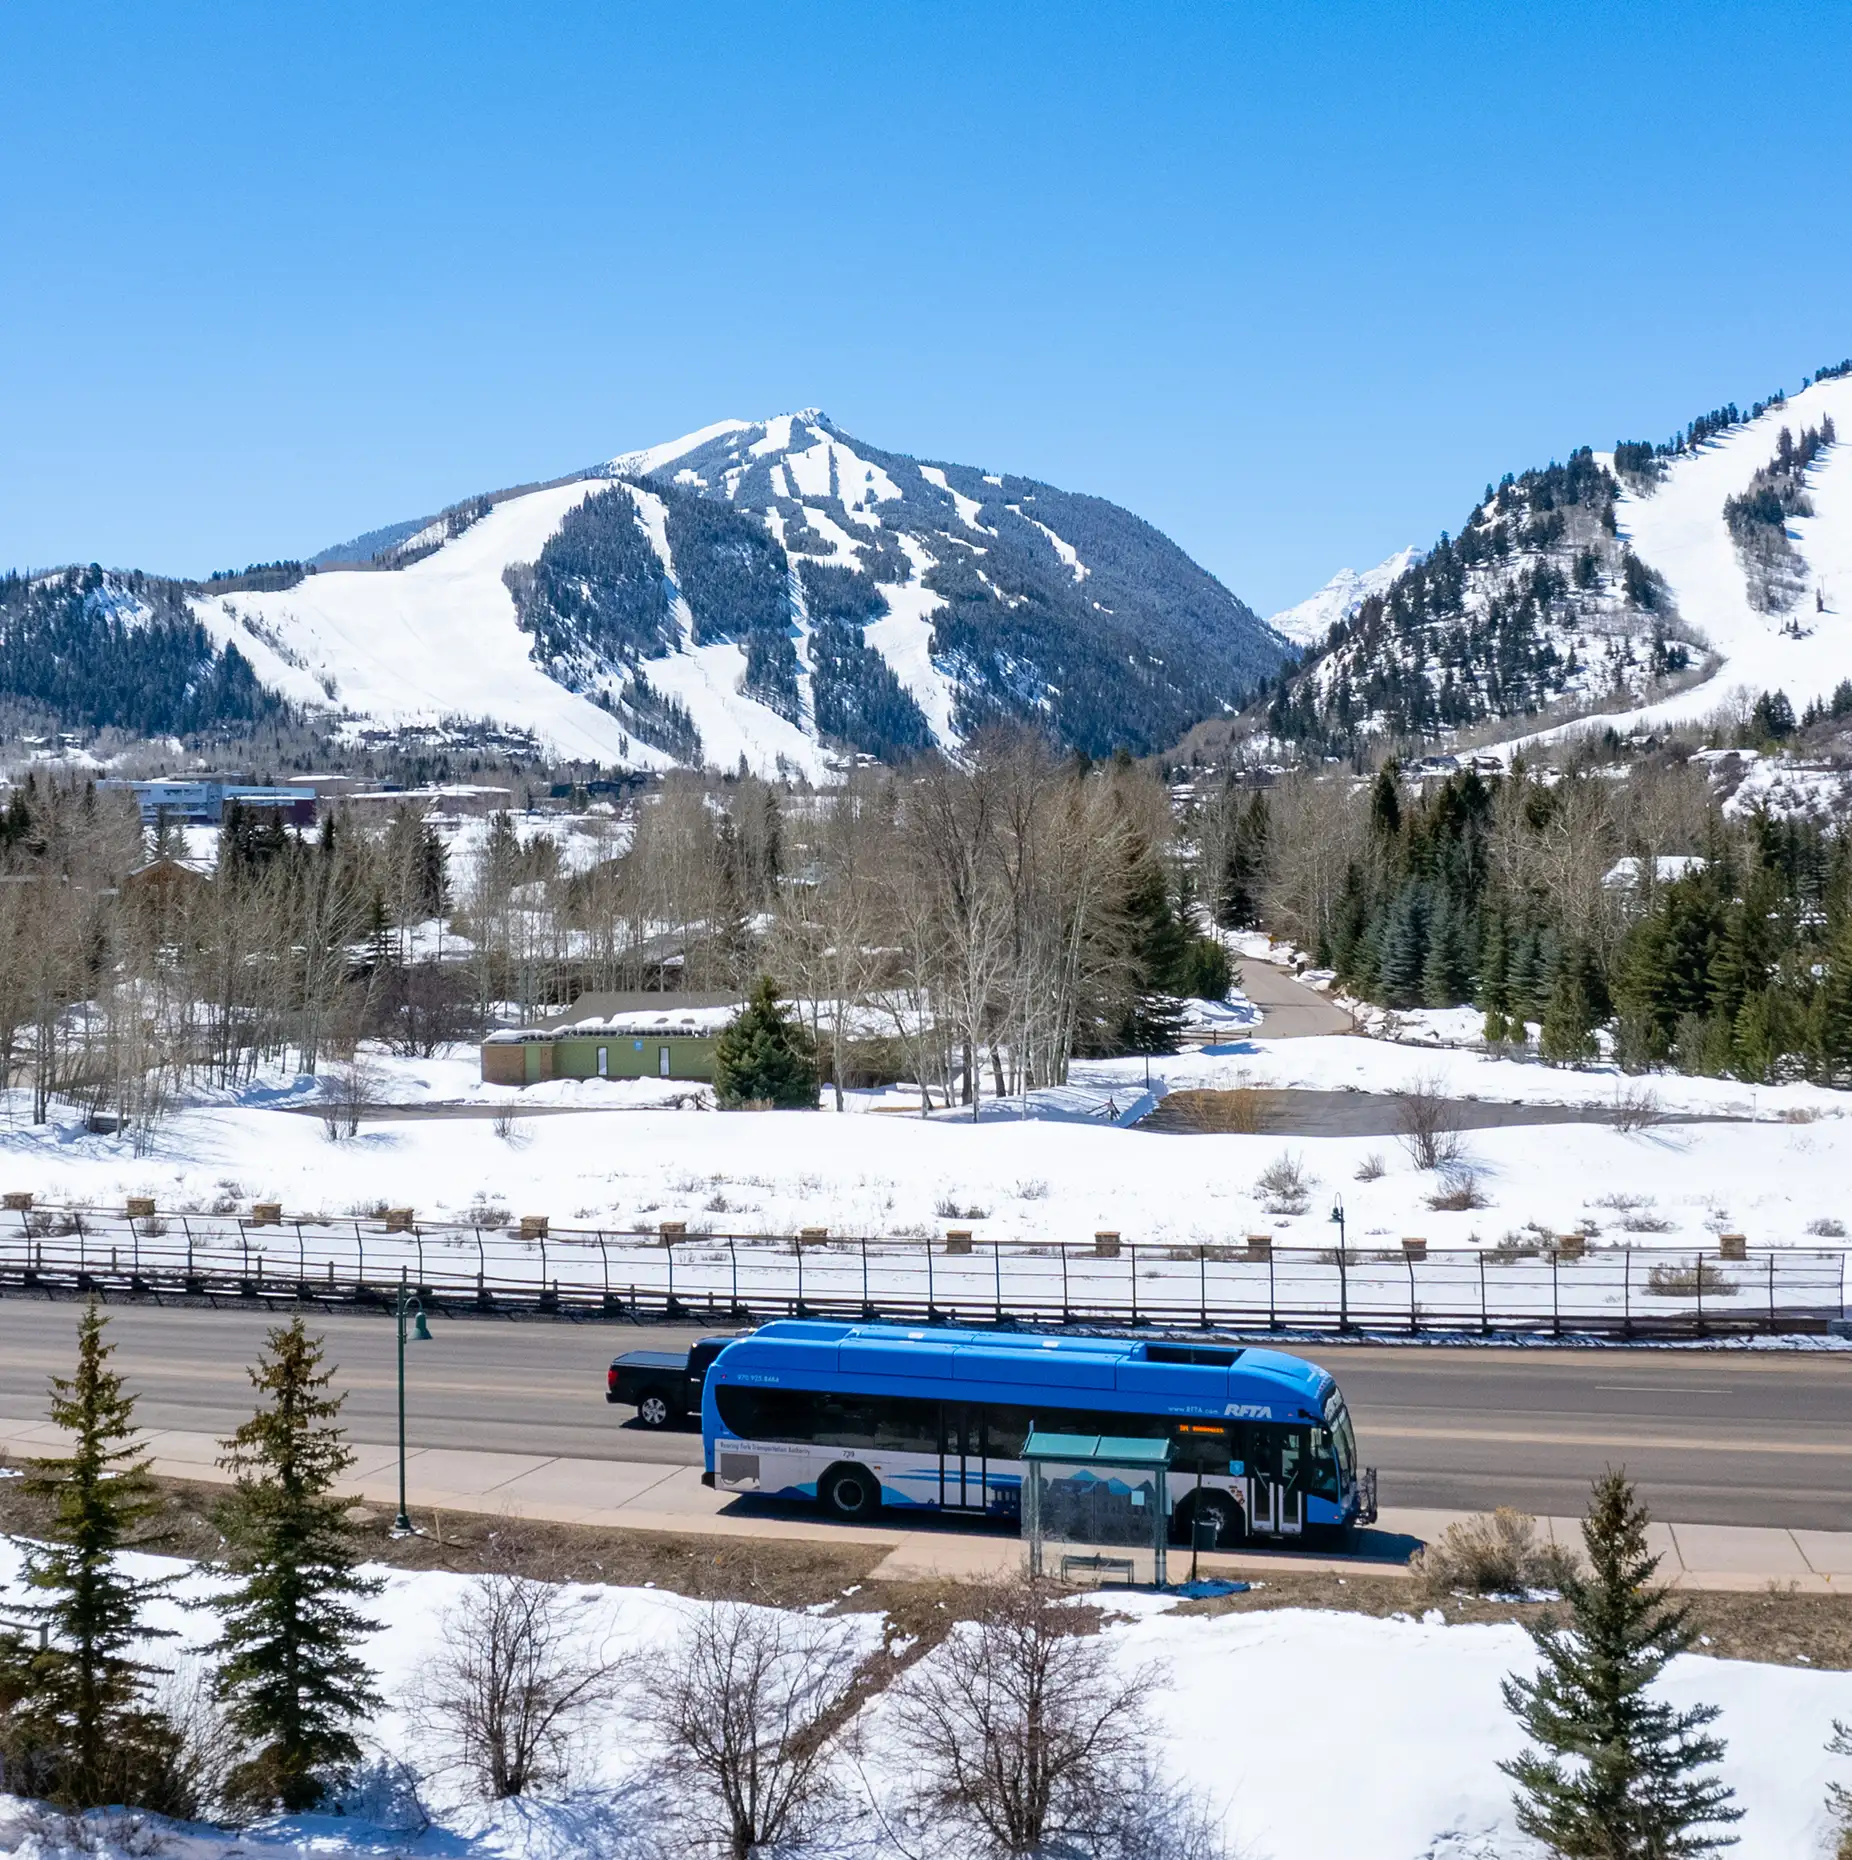 RFTA bus in the Roaring Fork Valley